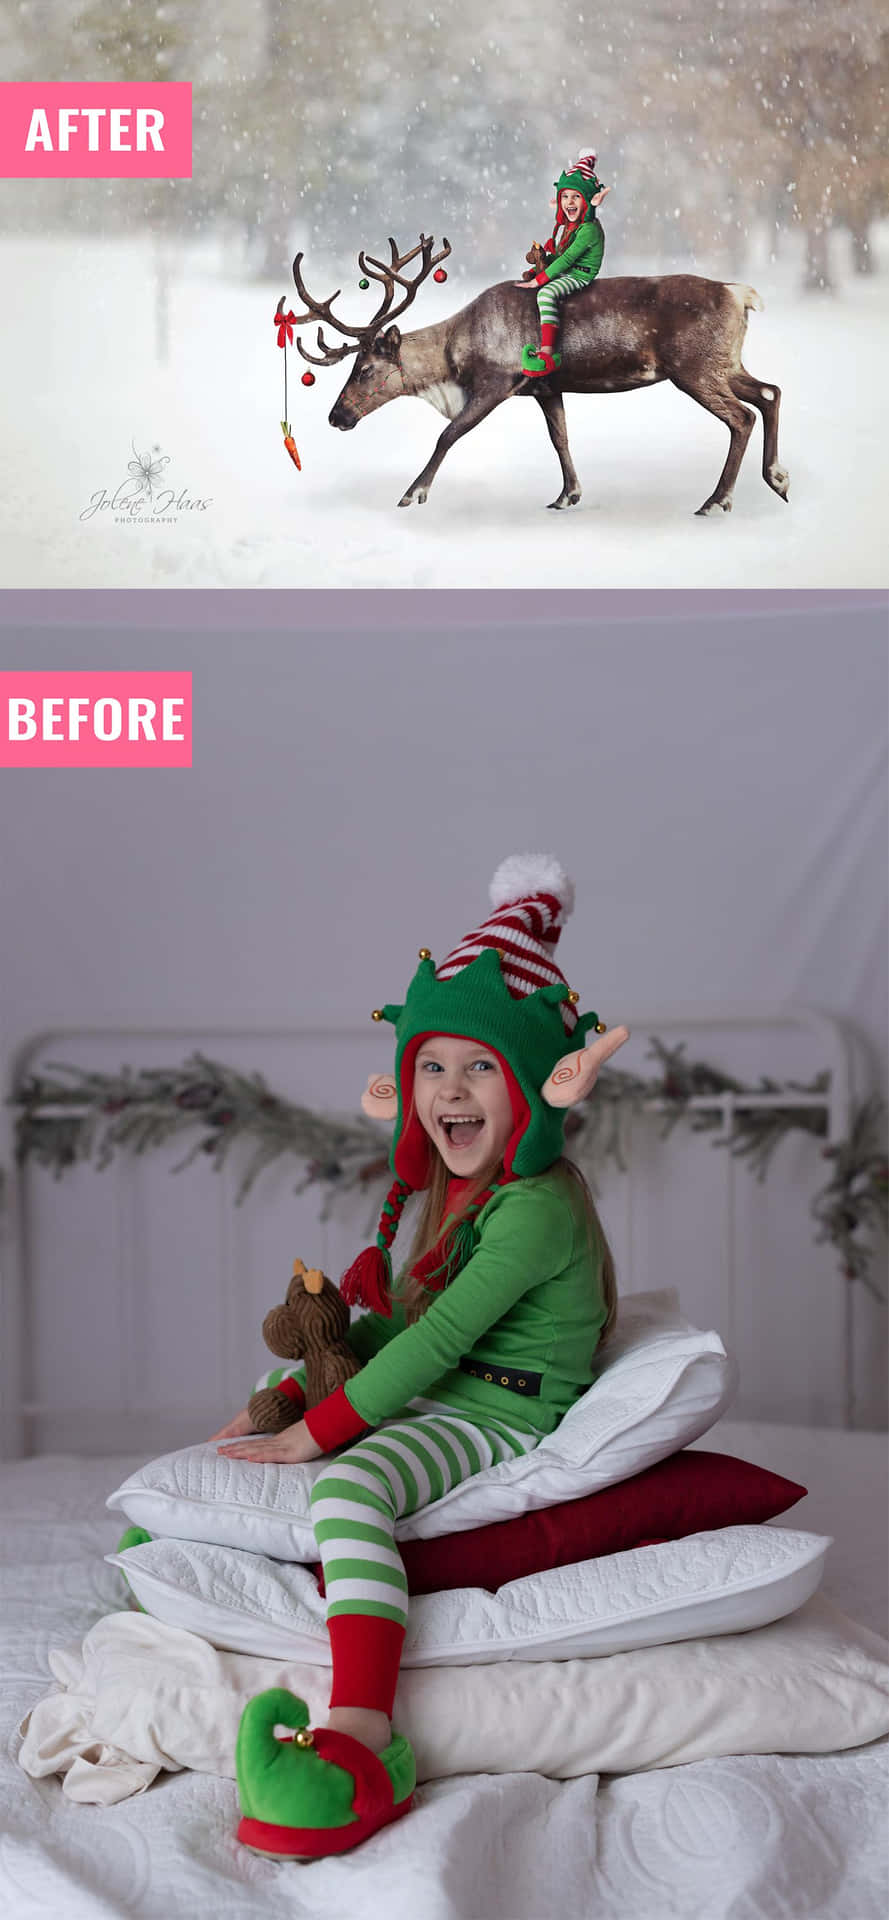 “This friendly elf is ready to help make your holiday dreams come true!”